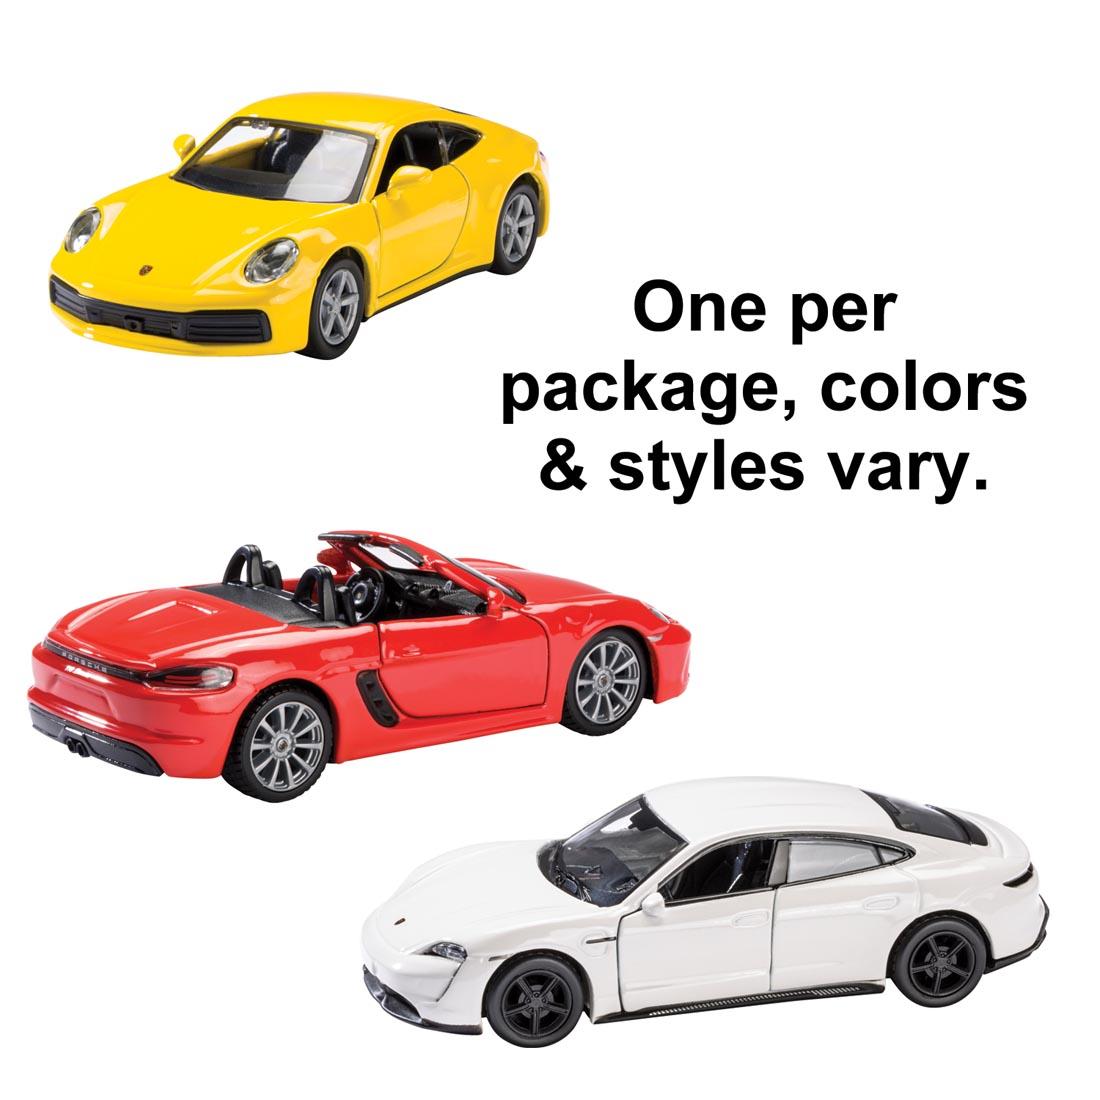 Three different Porsche Pull-Back Toys with the text One per package, colors & styles vary.